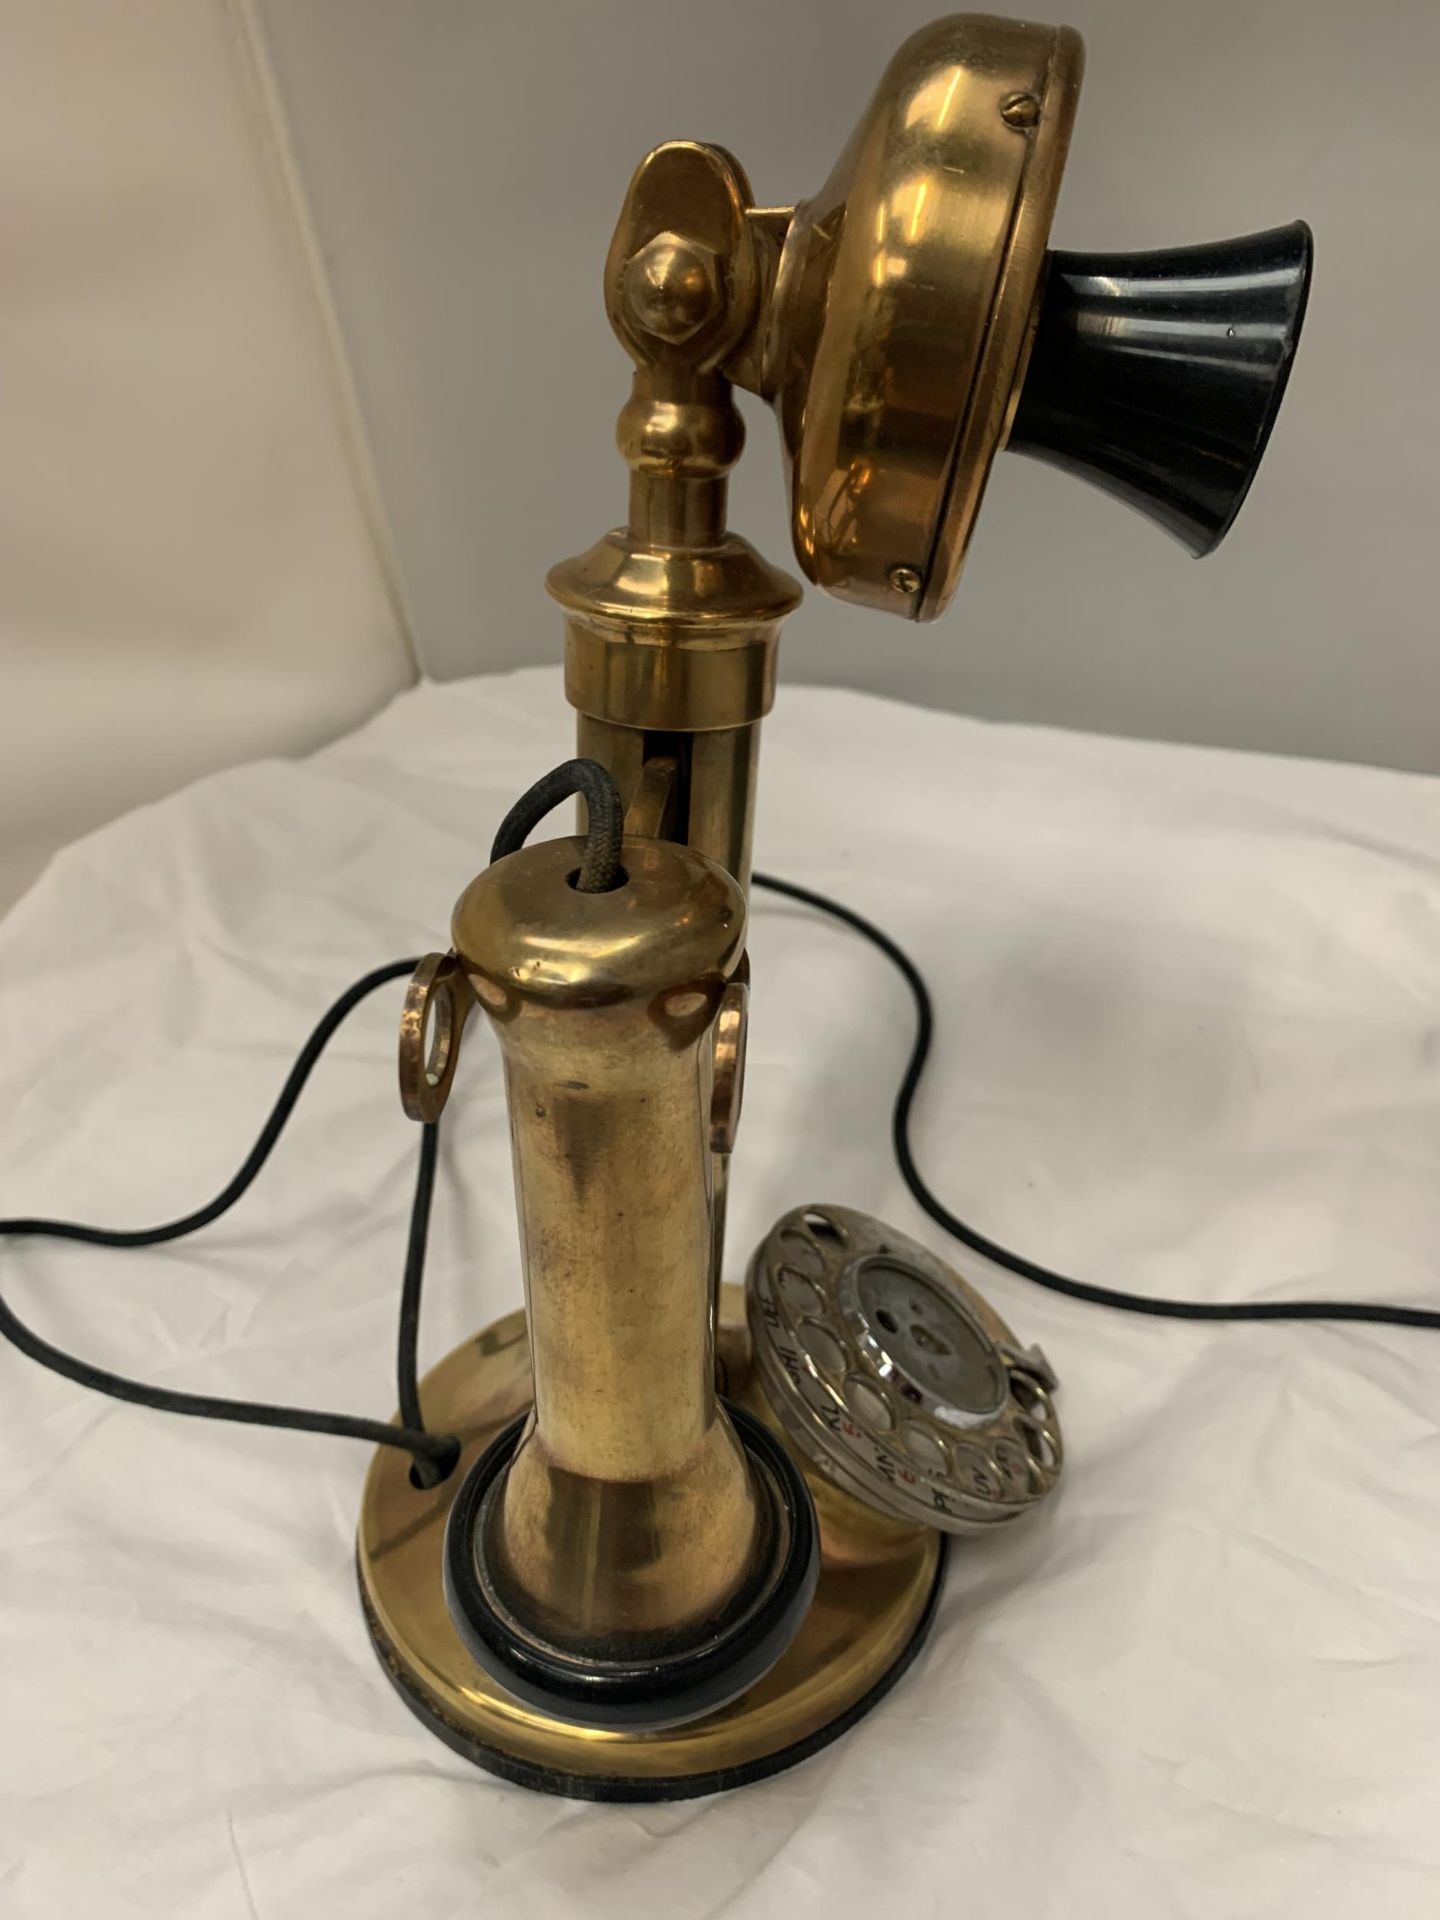 A BRASS 'CANDLESTICK' ROTARY DIAL TELEPHONE WITH EAR PIECE AND BOX - Image 5 of 5